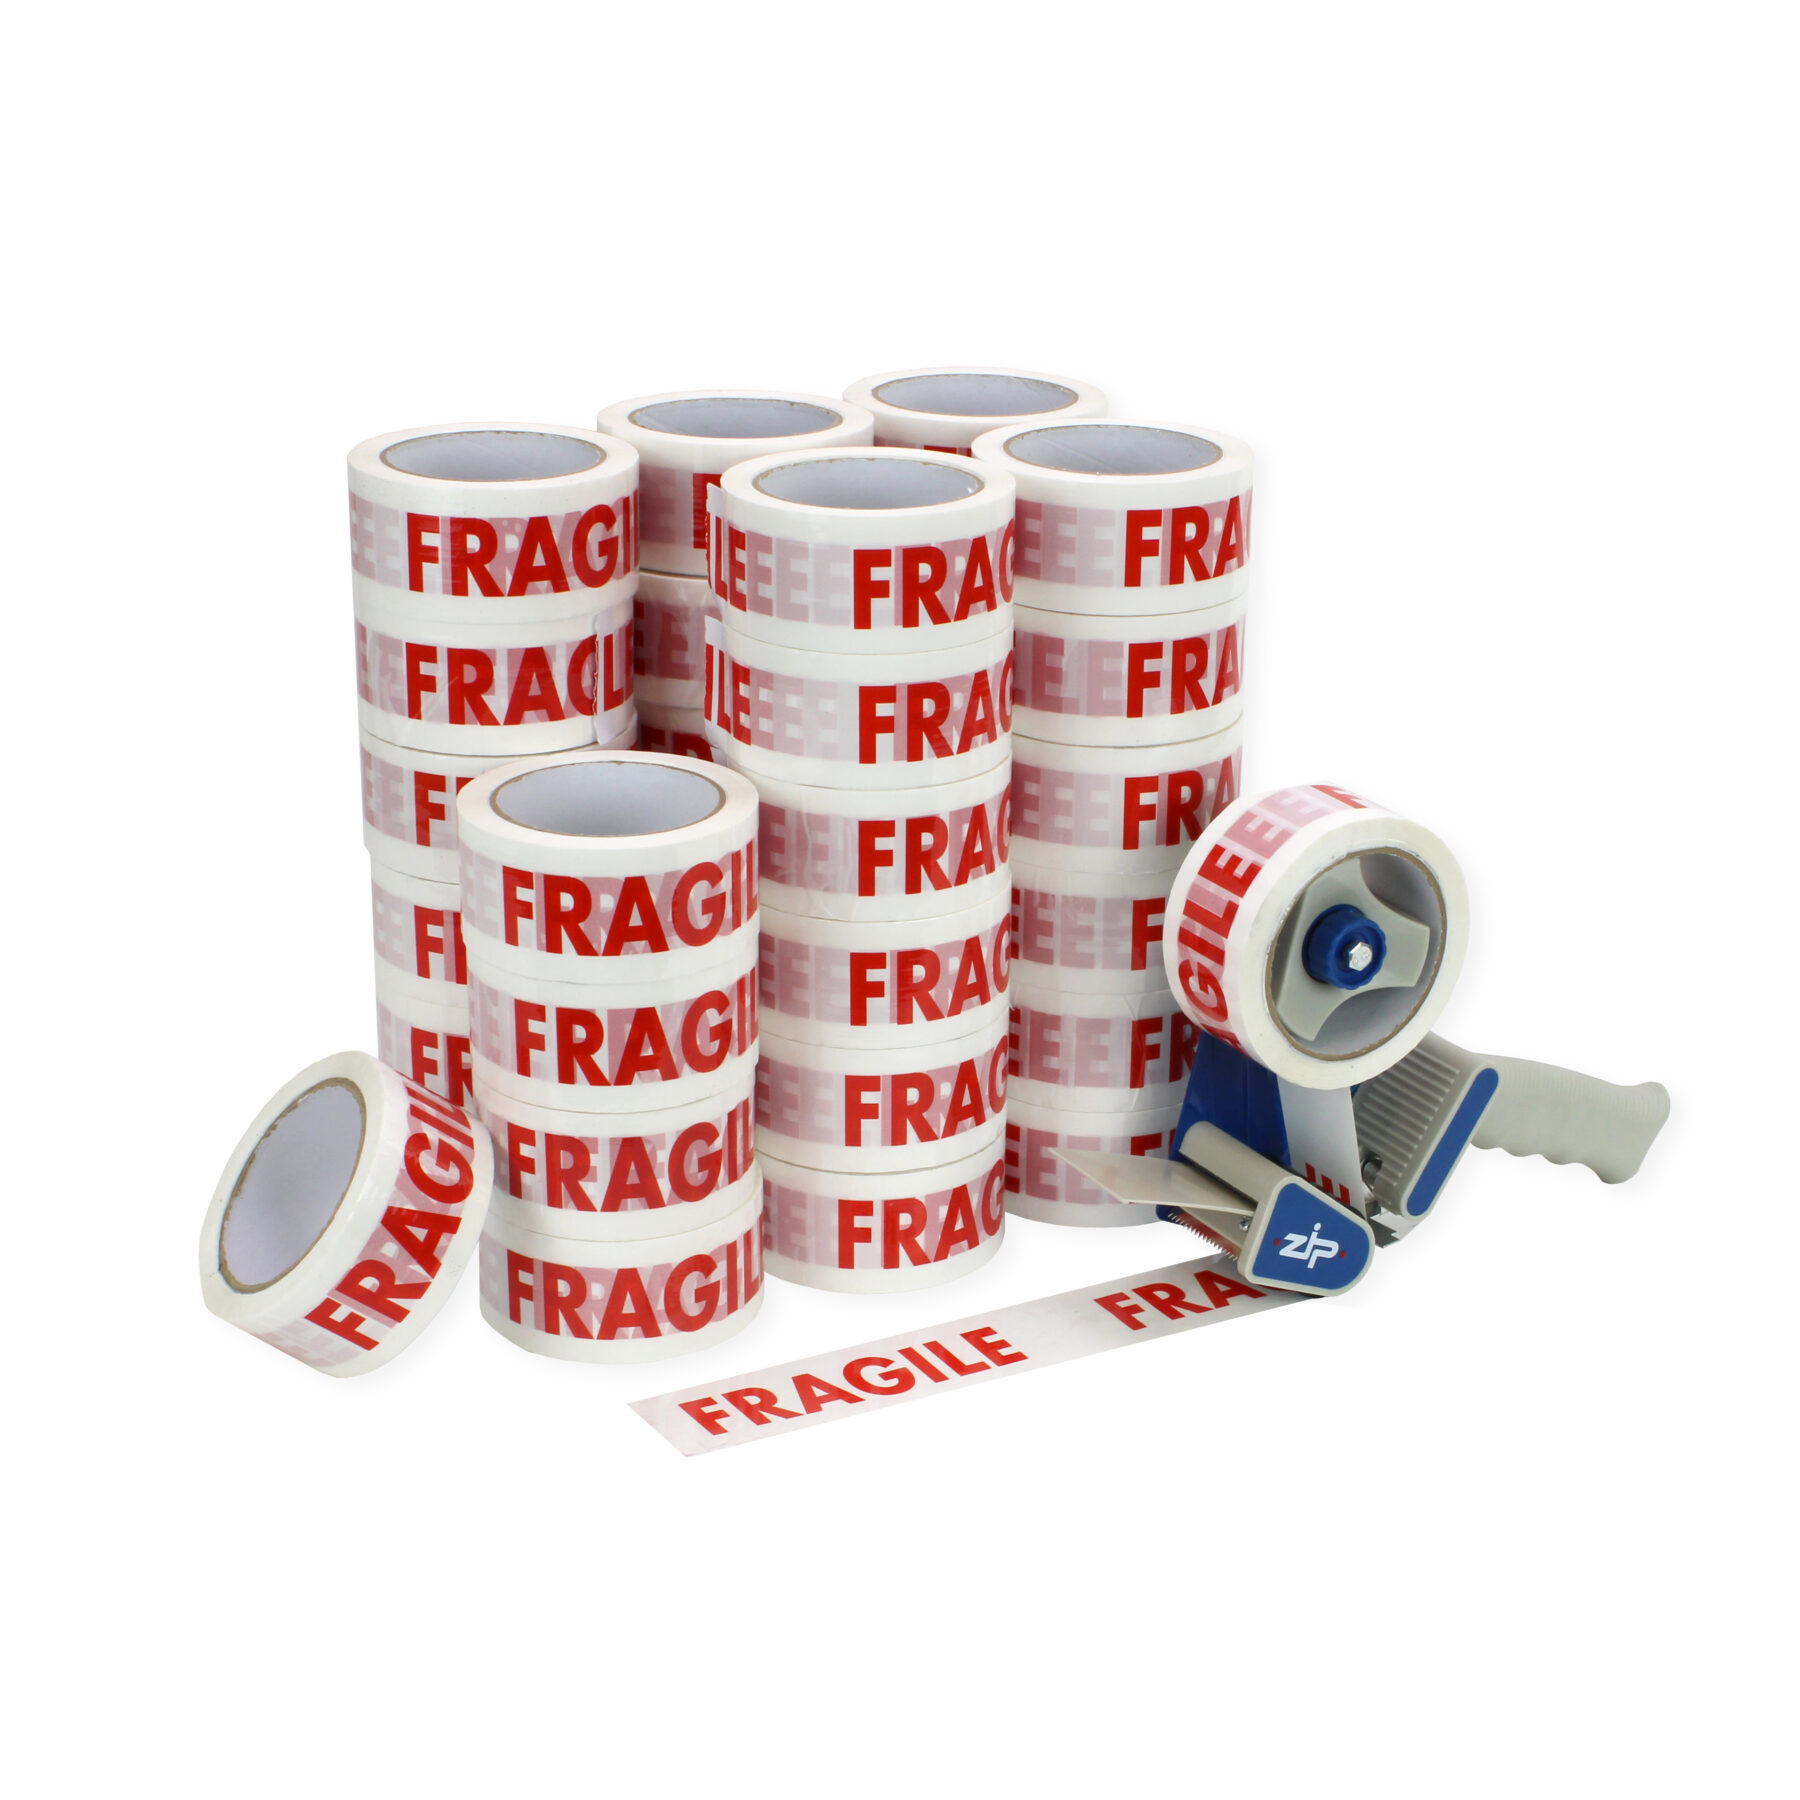 Fragile Packing Tape (36pcs) with Tape Gun